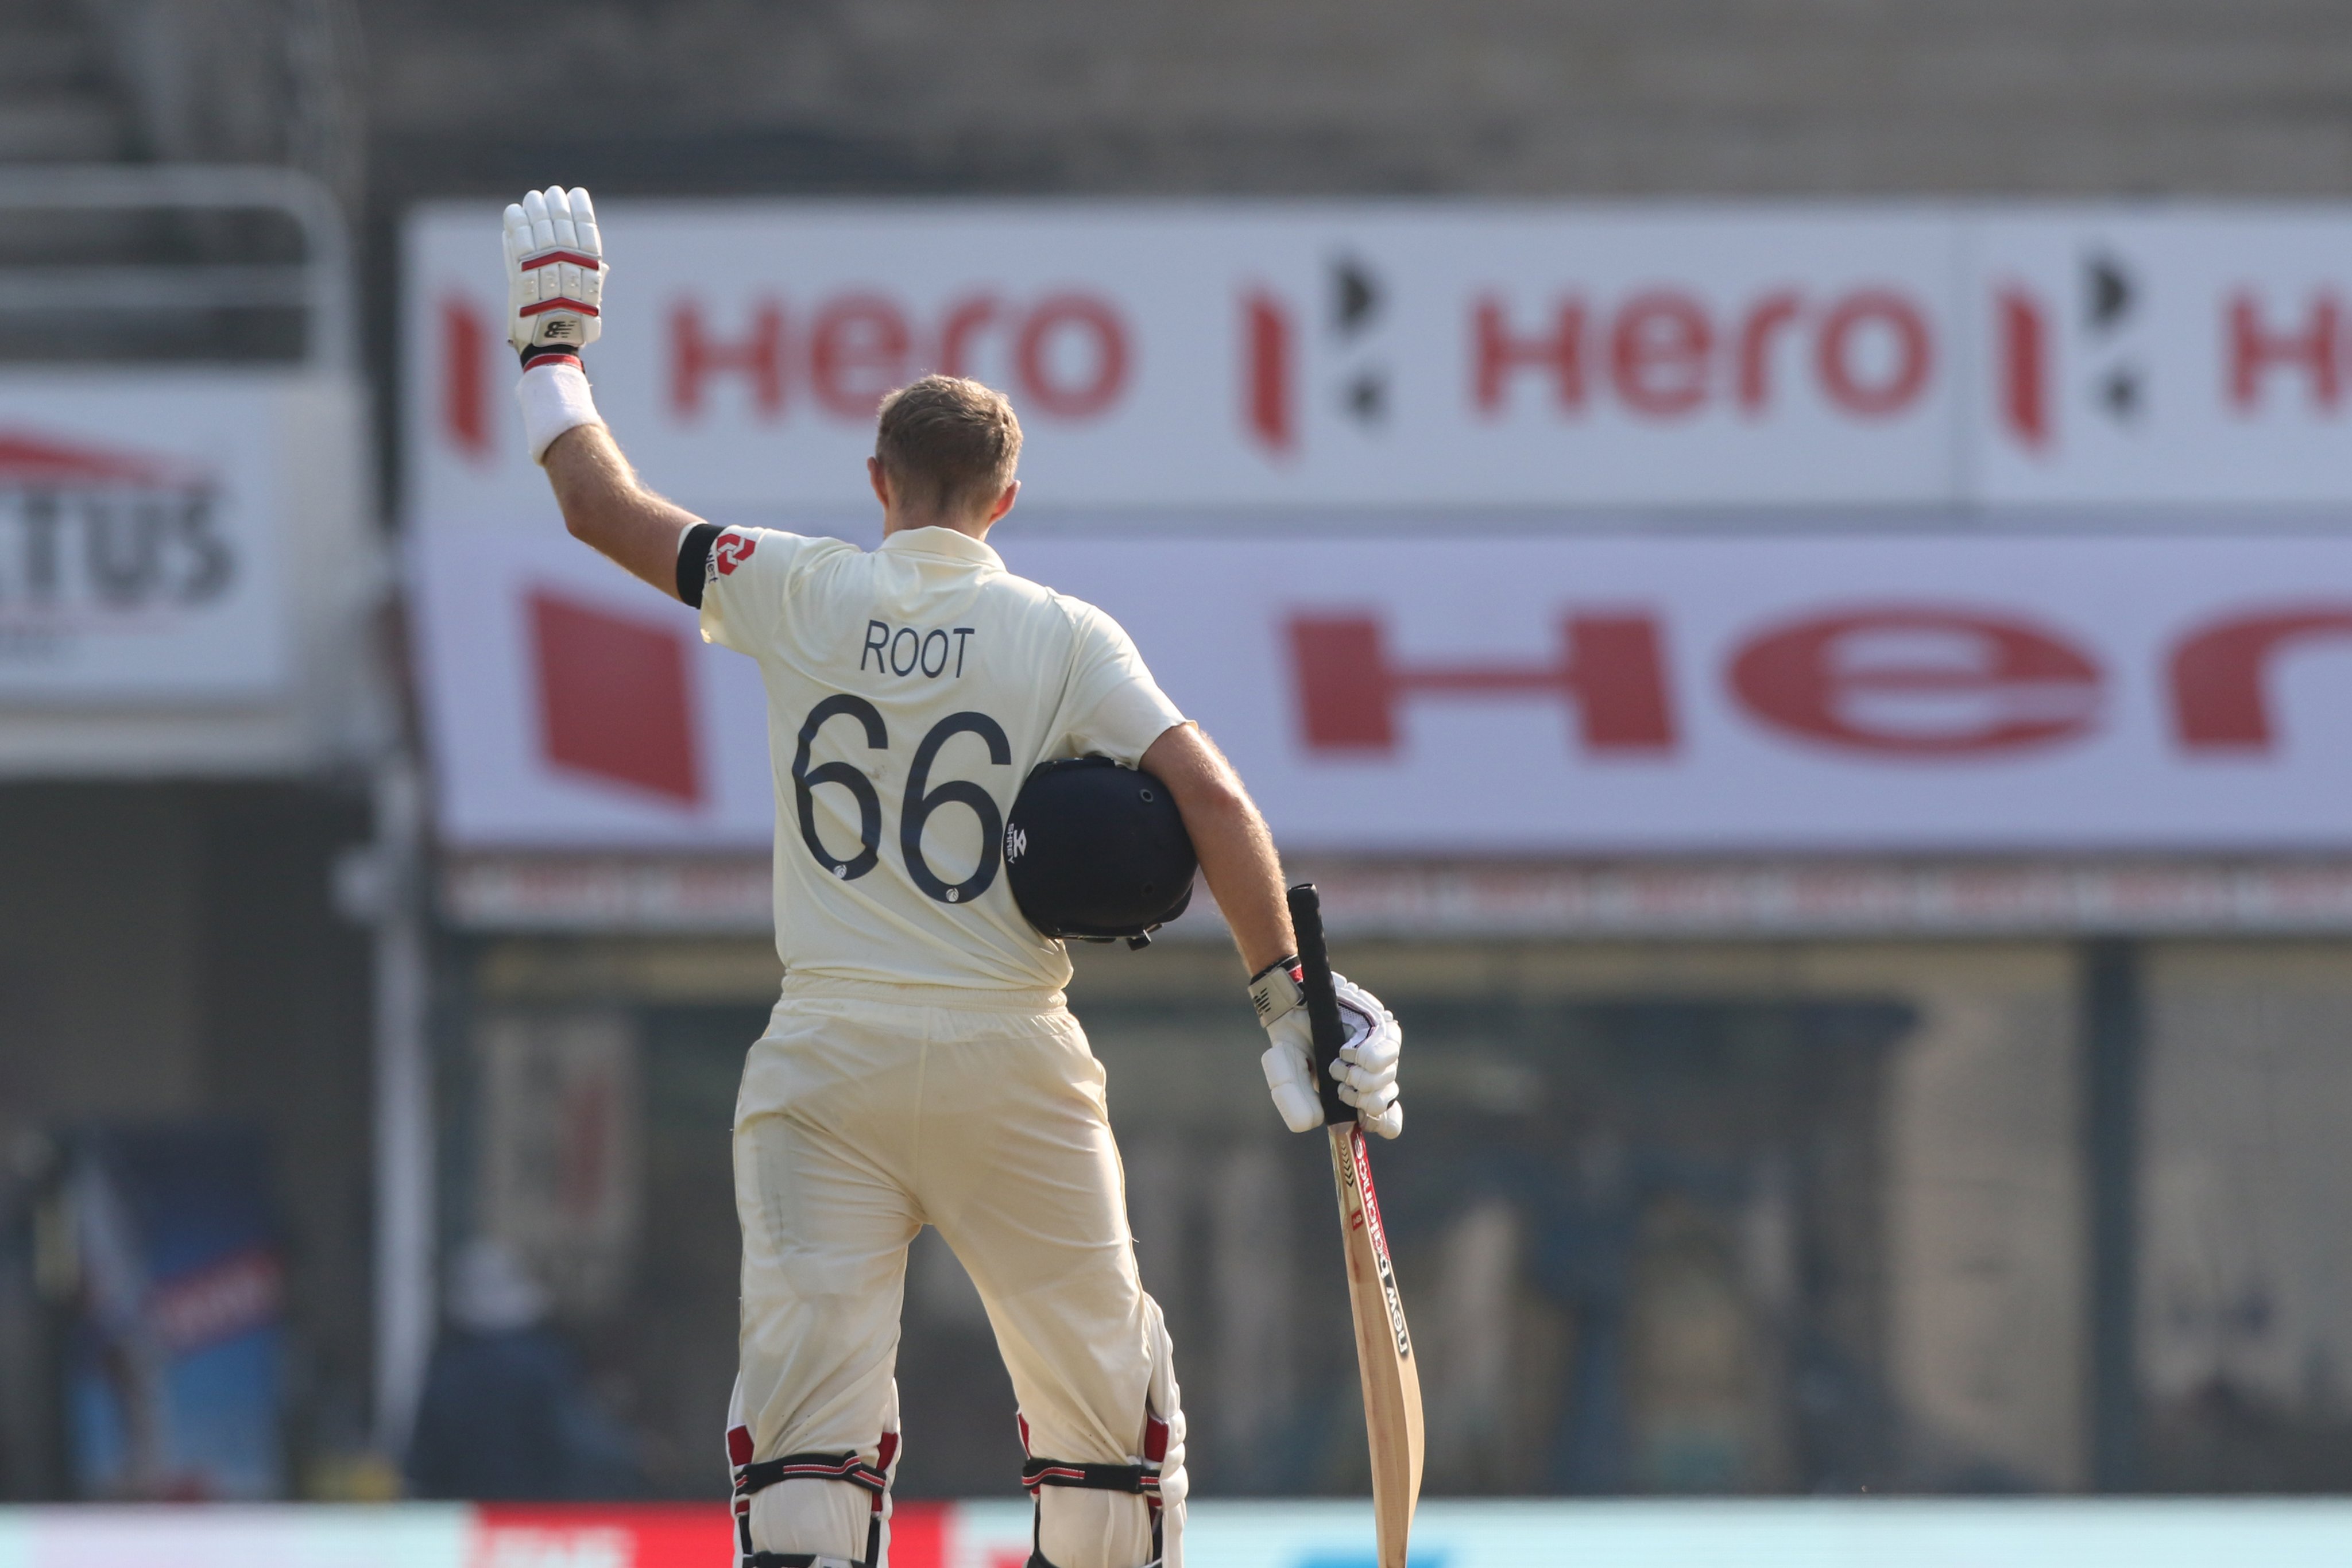 Joe Root becomes first player to score 200 in hundredth Test